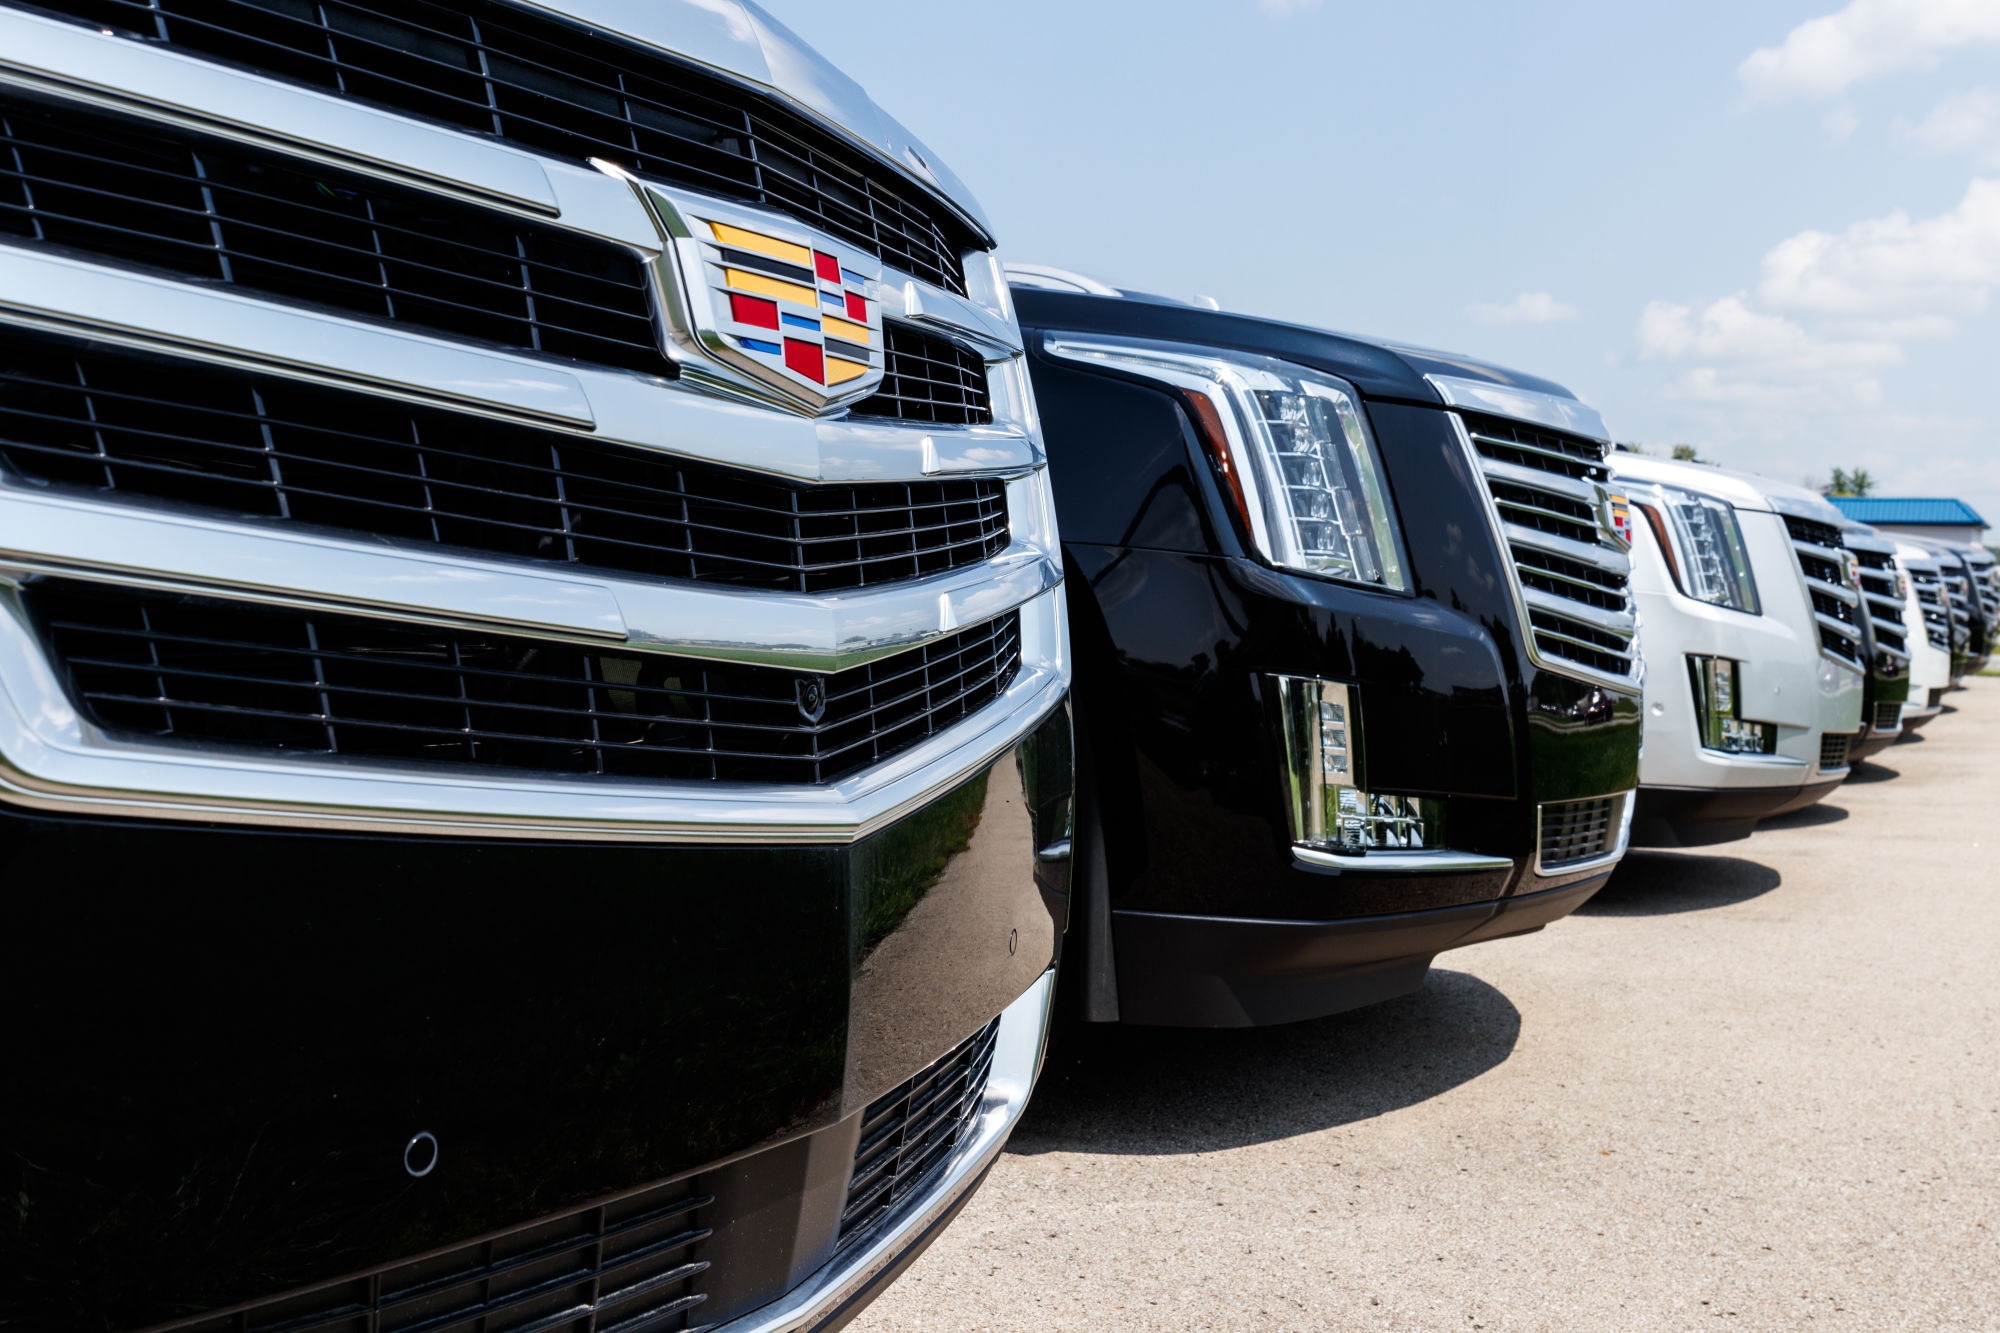 Cadillac pauses its $1,800-per-month car subscription service | DeviceDaily.com